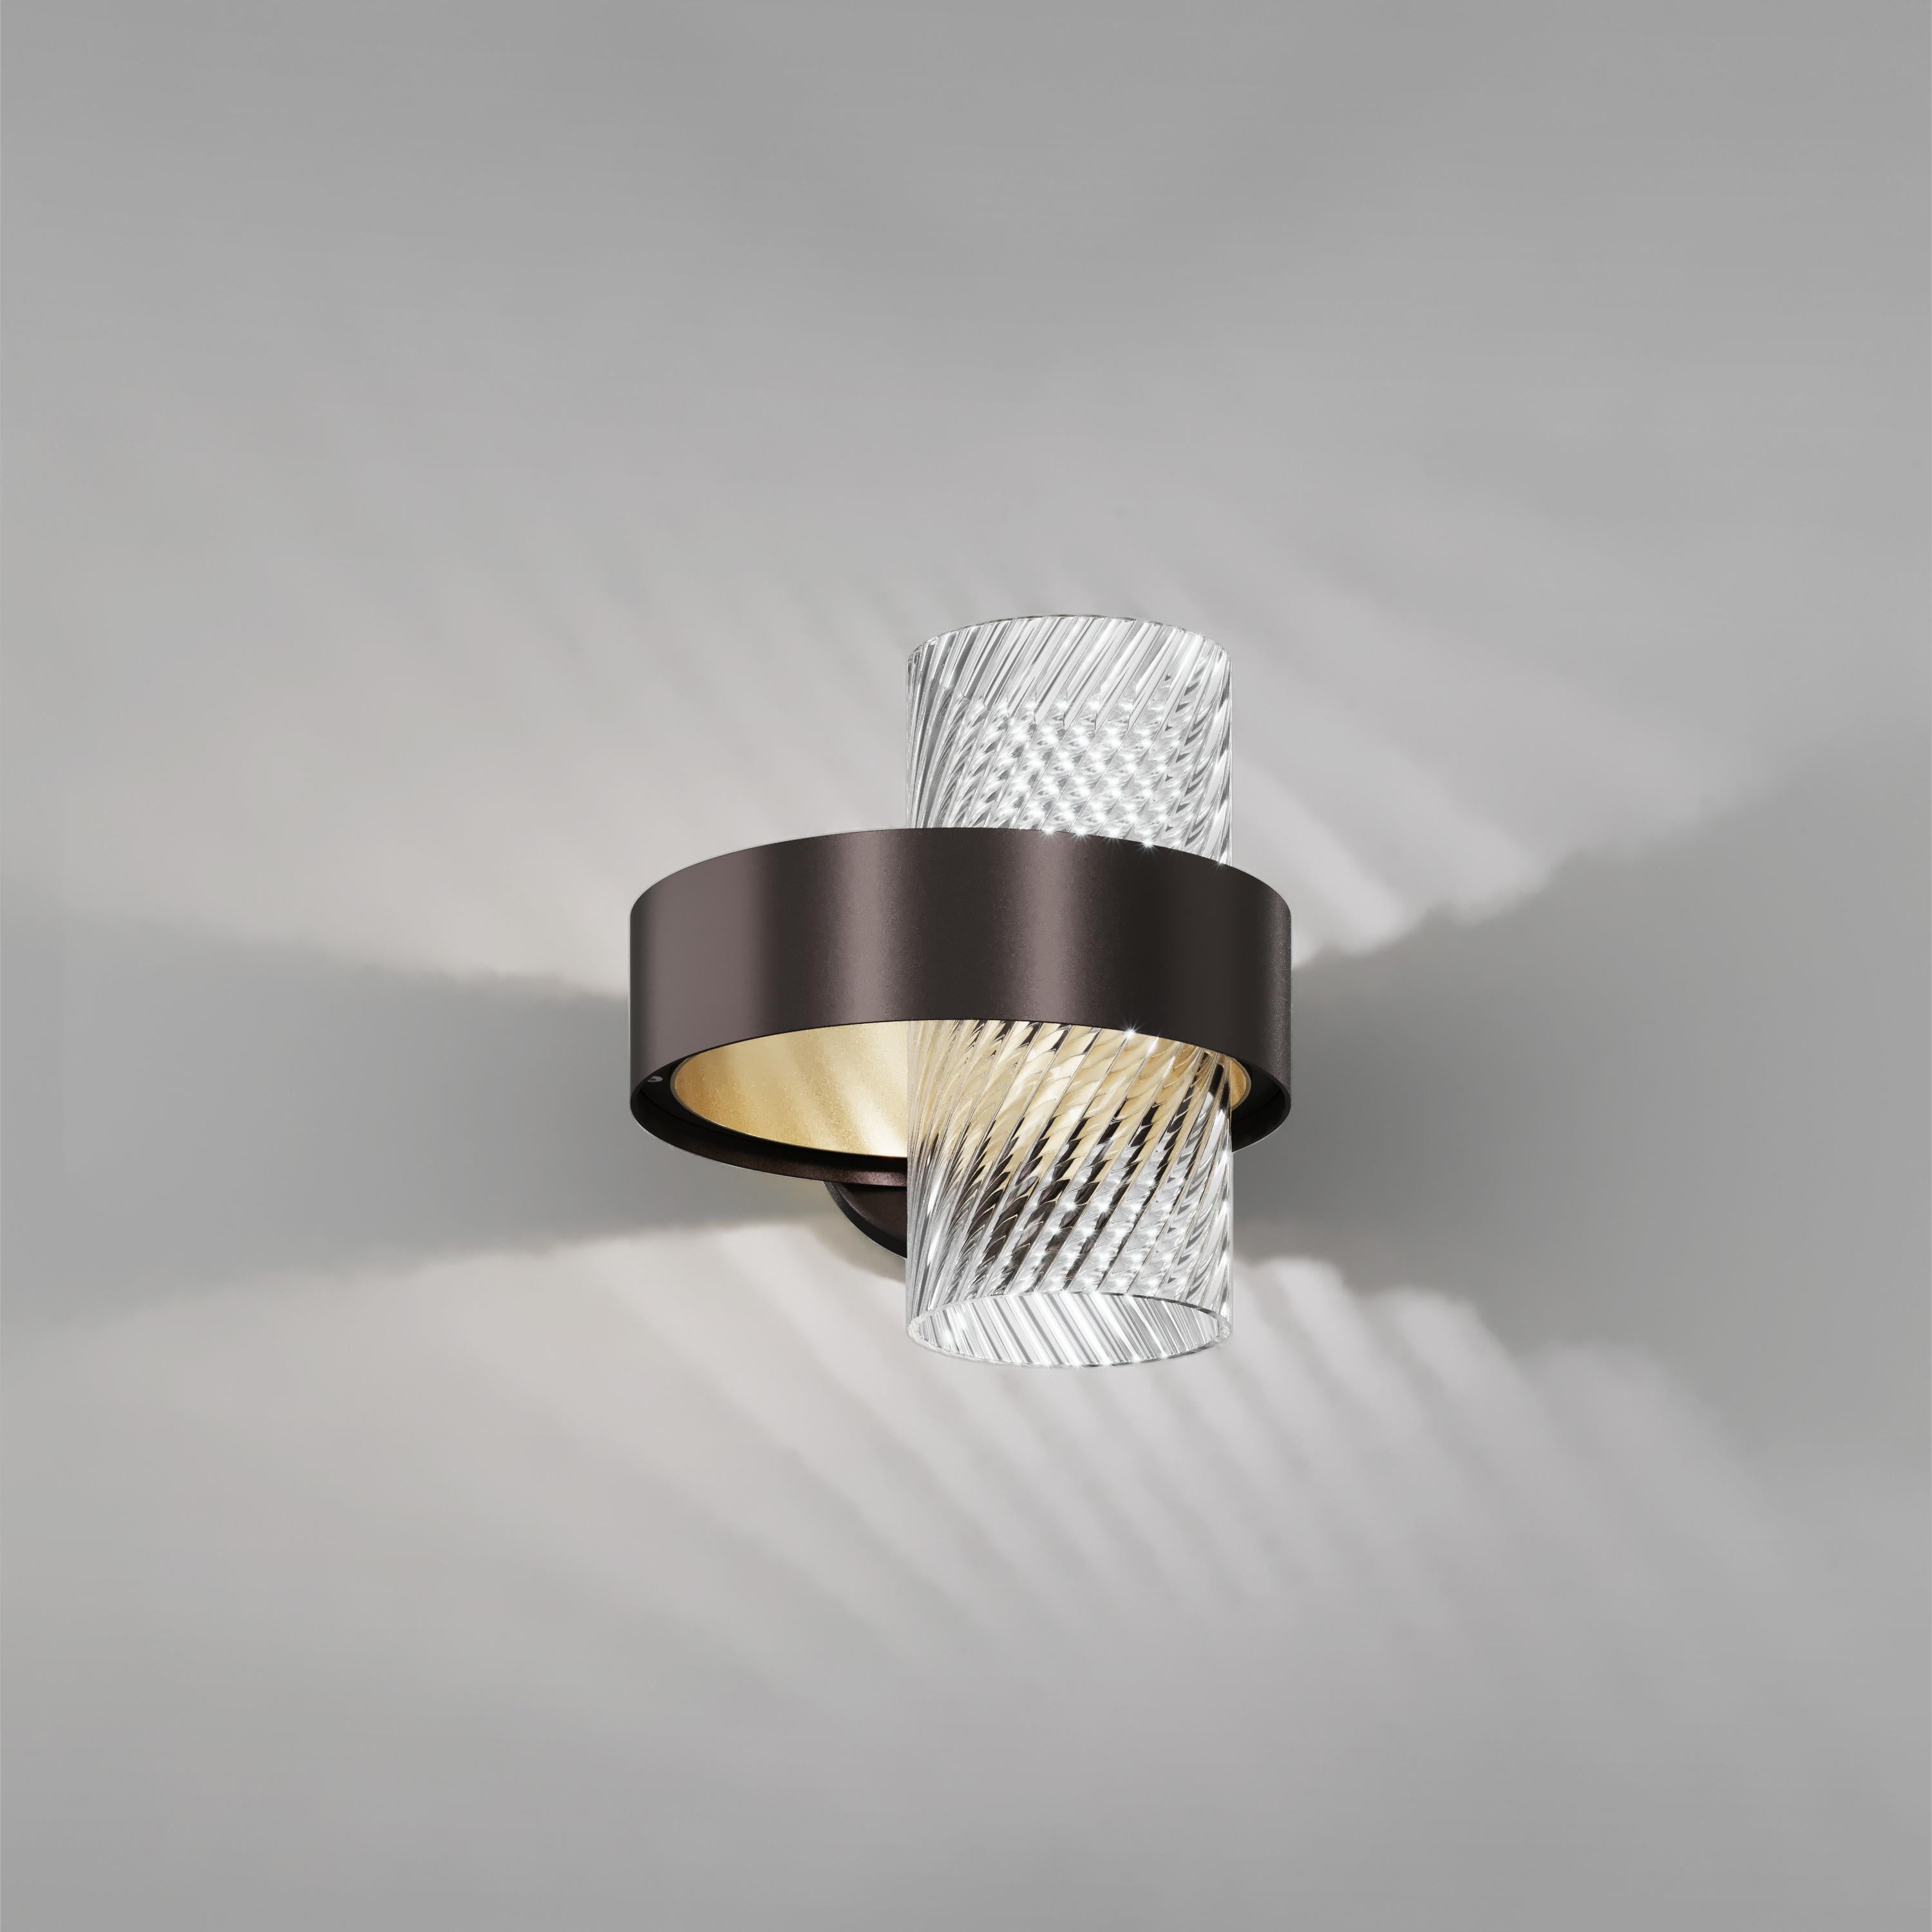 Armonia wall lamp in crystal glass with black and brass frame by Vistosi.